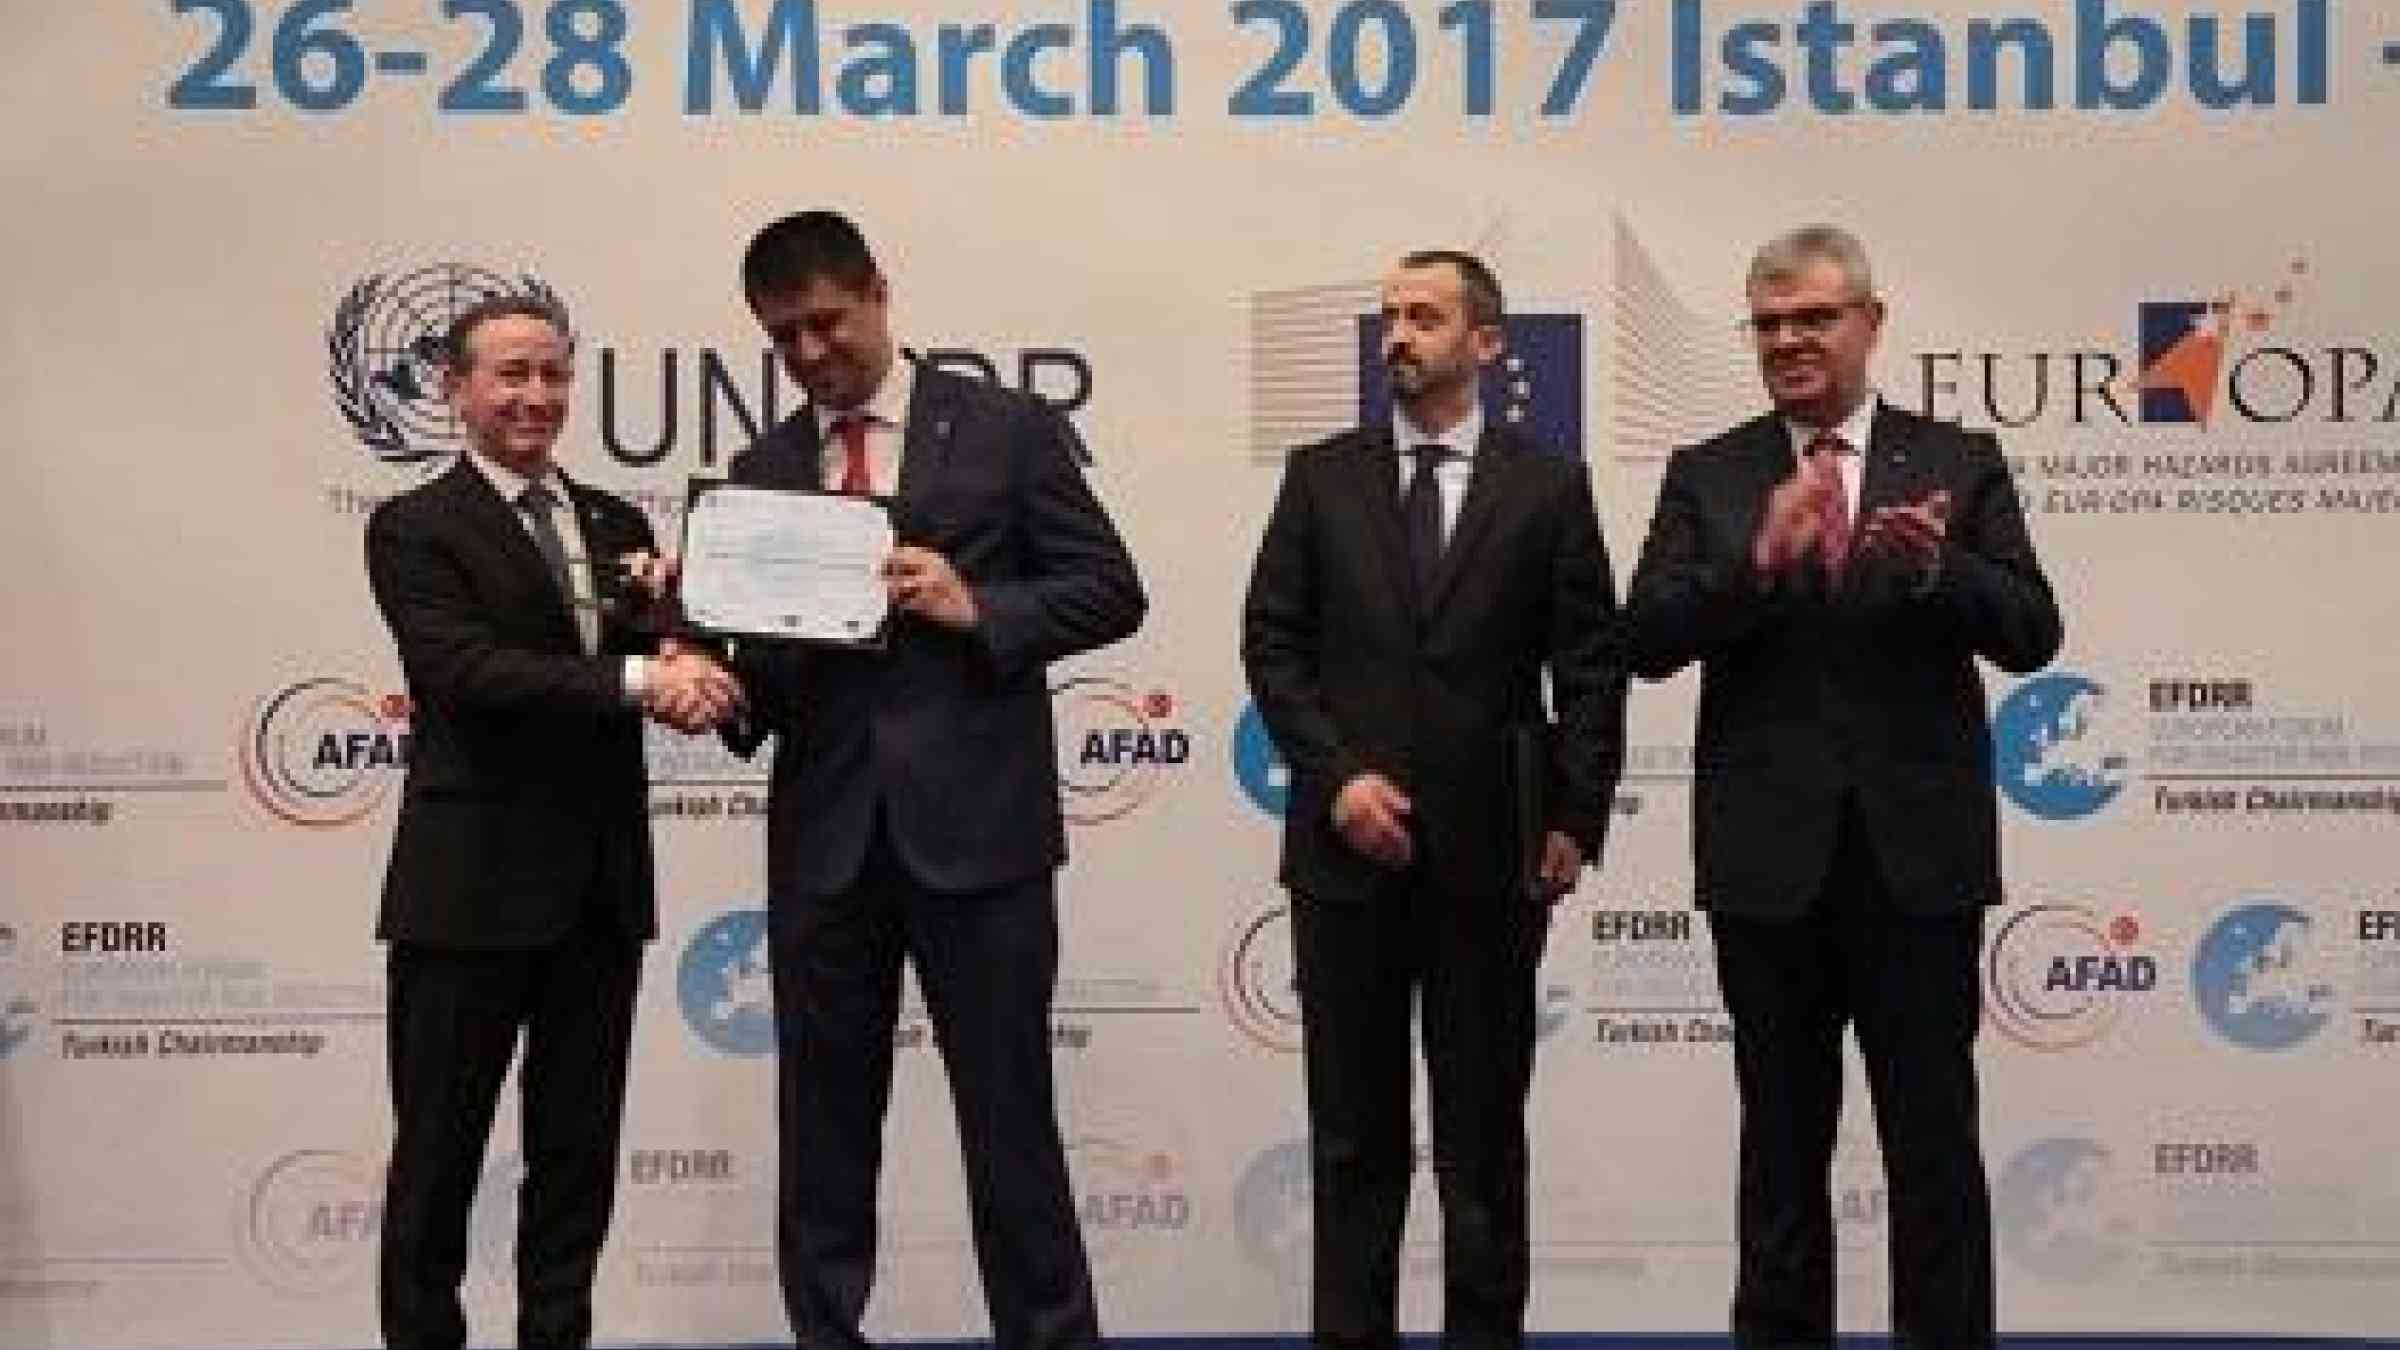 Robert Glasser, Special Representative of the UN Secretary-General for Disaster Risk Reduction (left) presents the Damir Cemerin Award to Erkan Samiloglu of Turkey's Ministry of Youth and Sports, watched by Mahmut Baş of fellow laureate the Directorate of Earthquake and Ground Research, Istanbul Metropolitan Municipality (centre right), and Turkish Deputy Prime Minister Veysi Kaynak (Photo: AFAD)